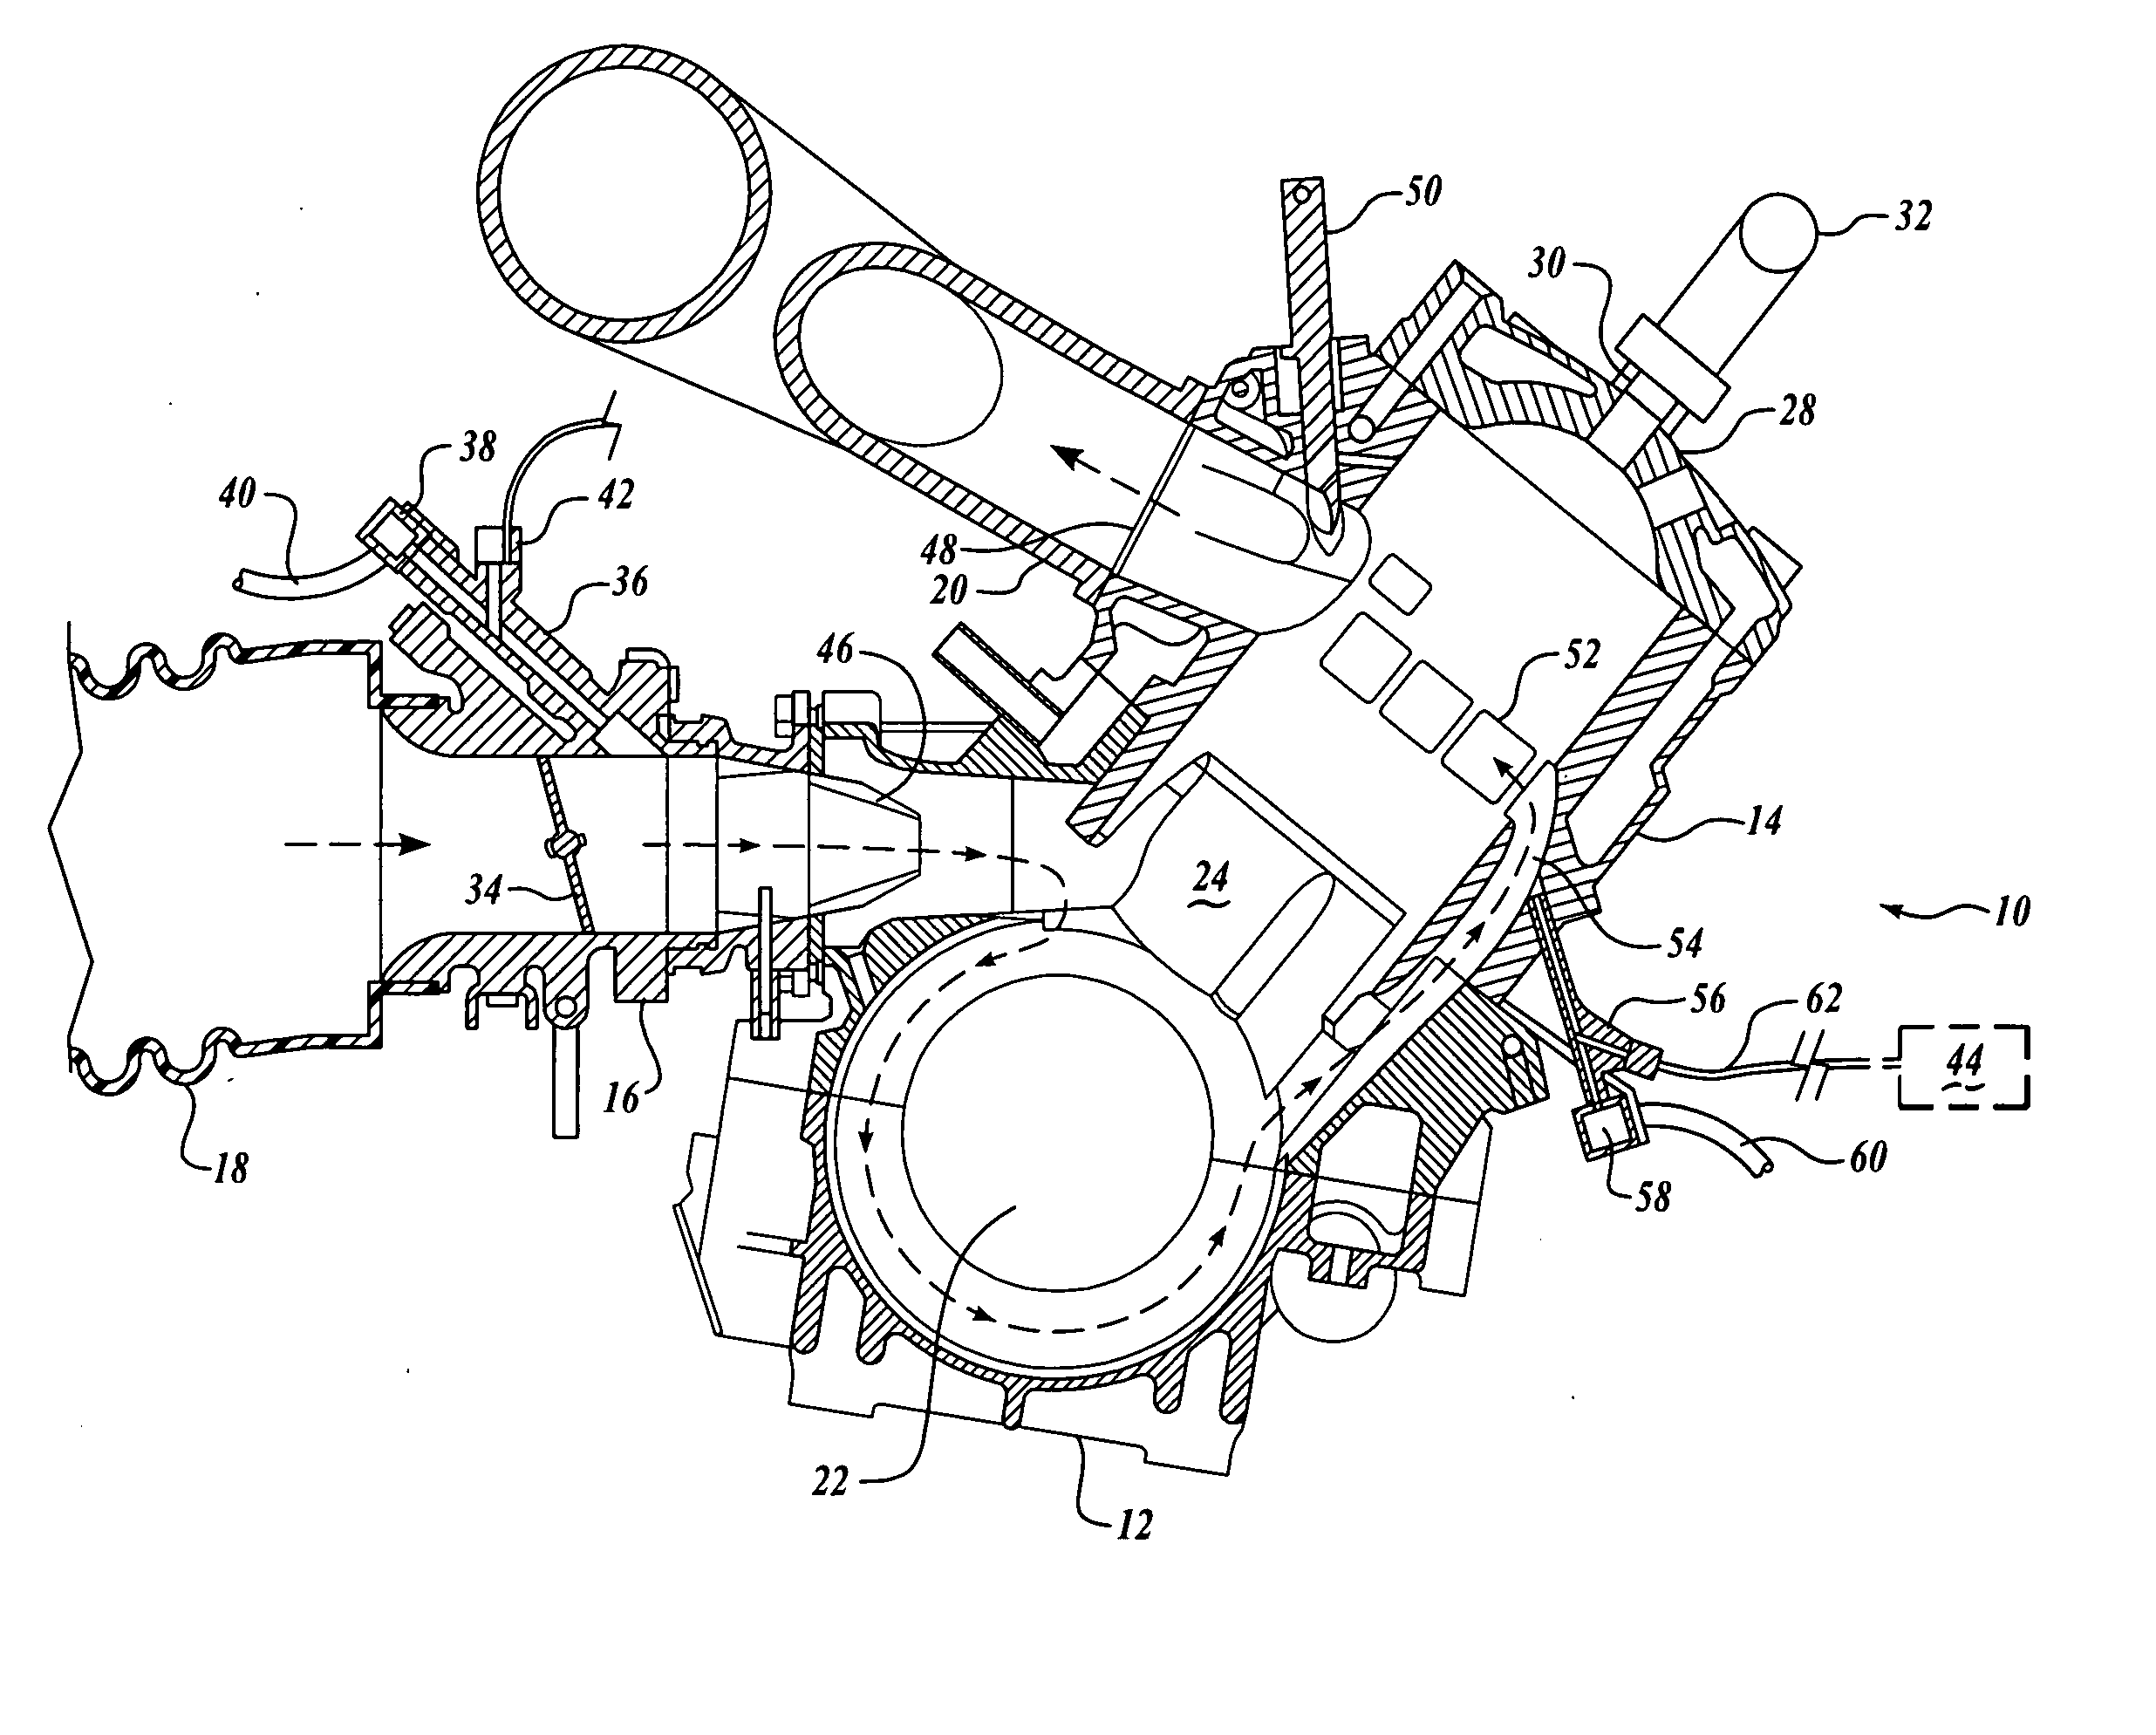 Multi-location fuel injection system